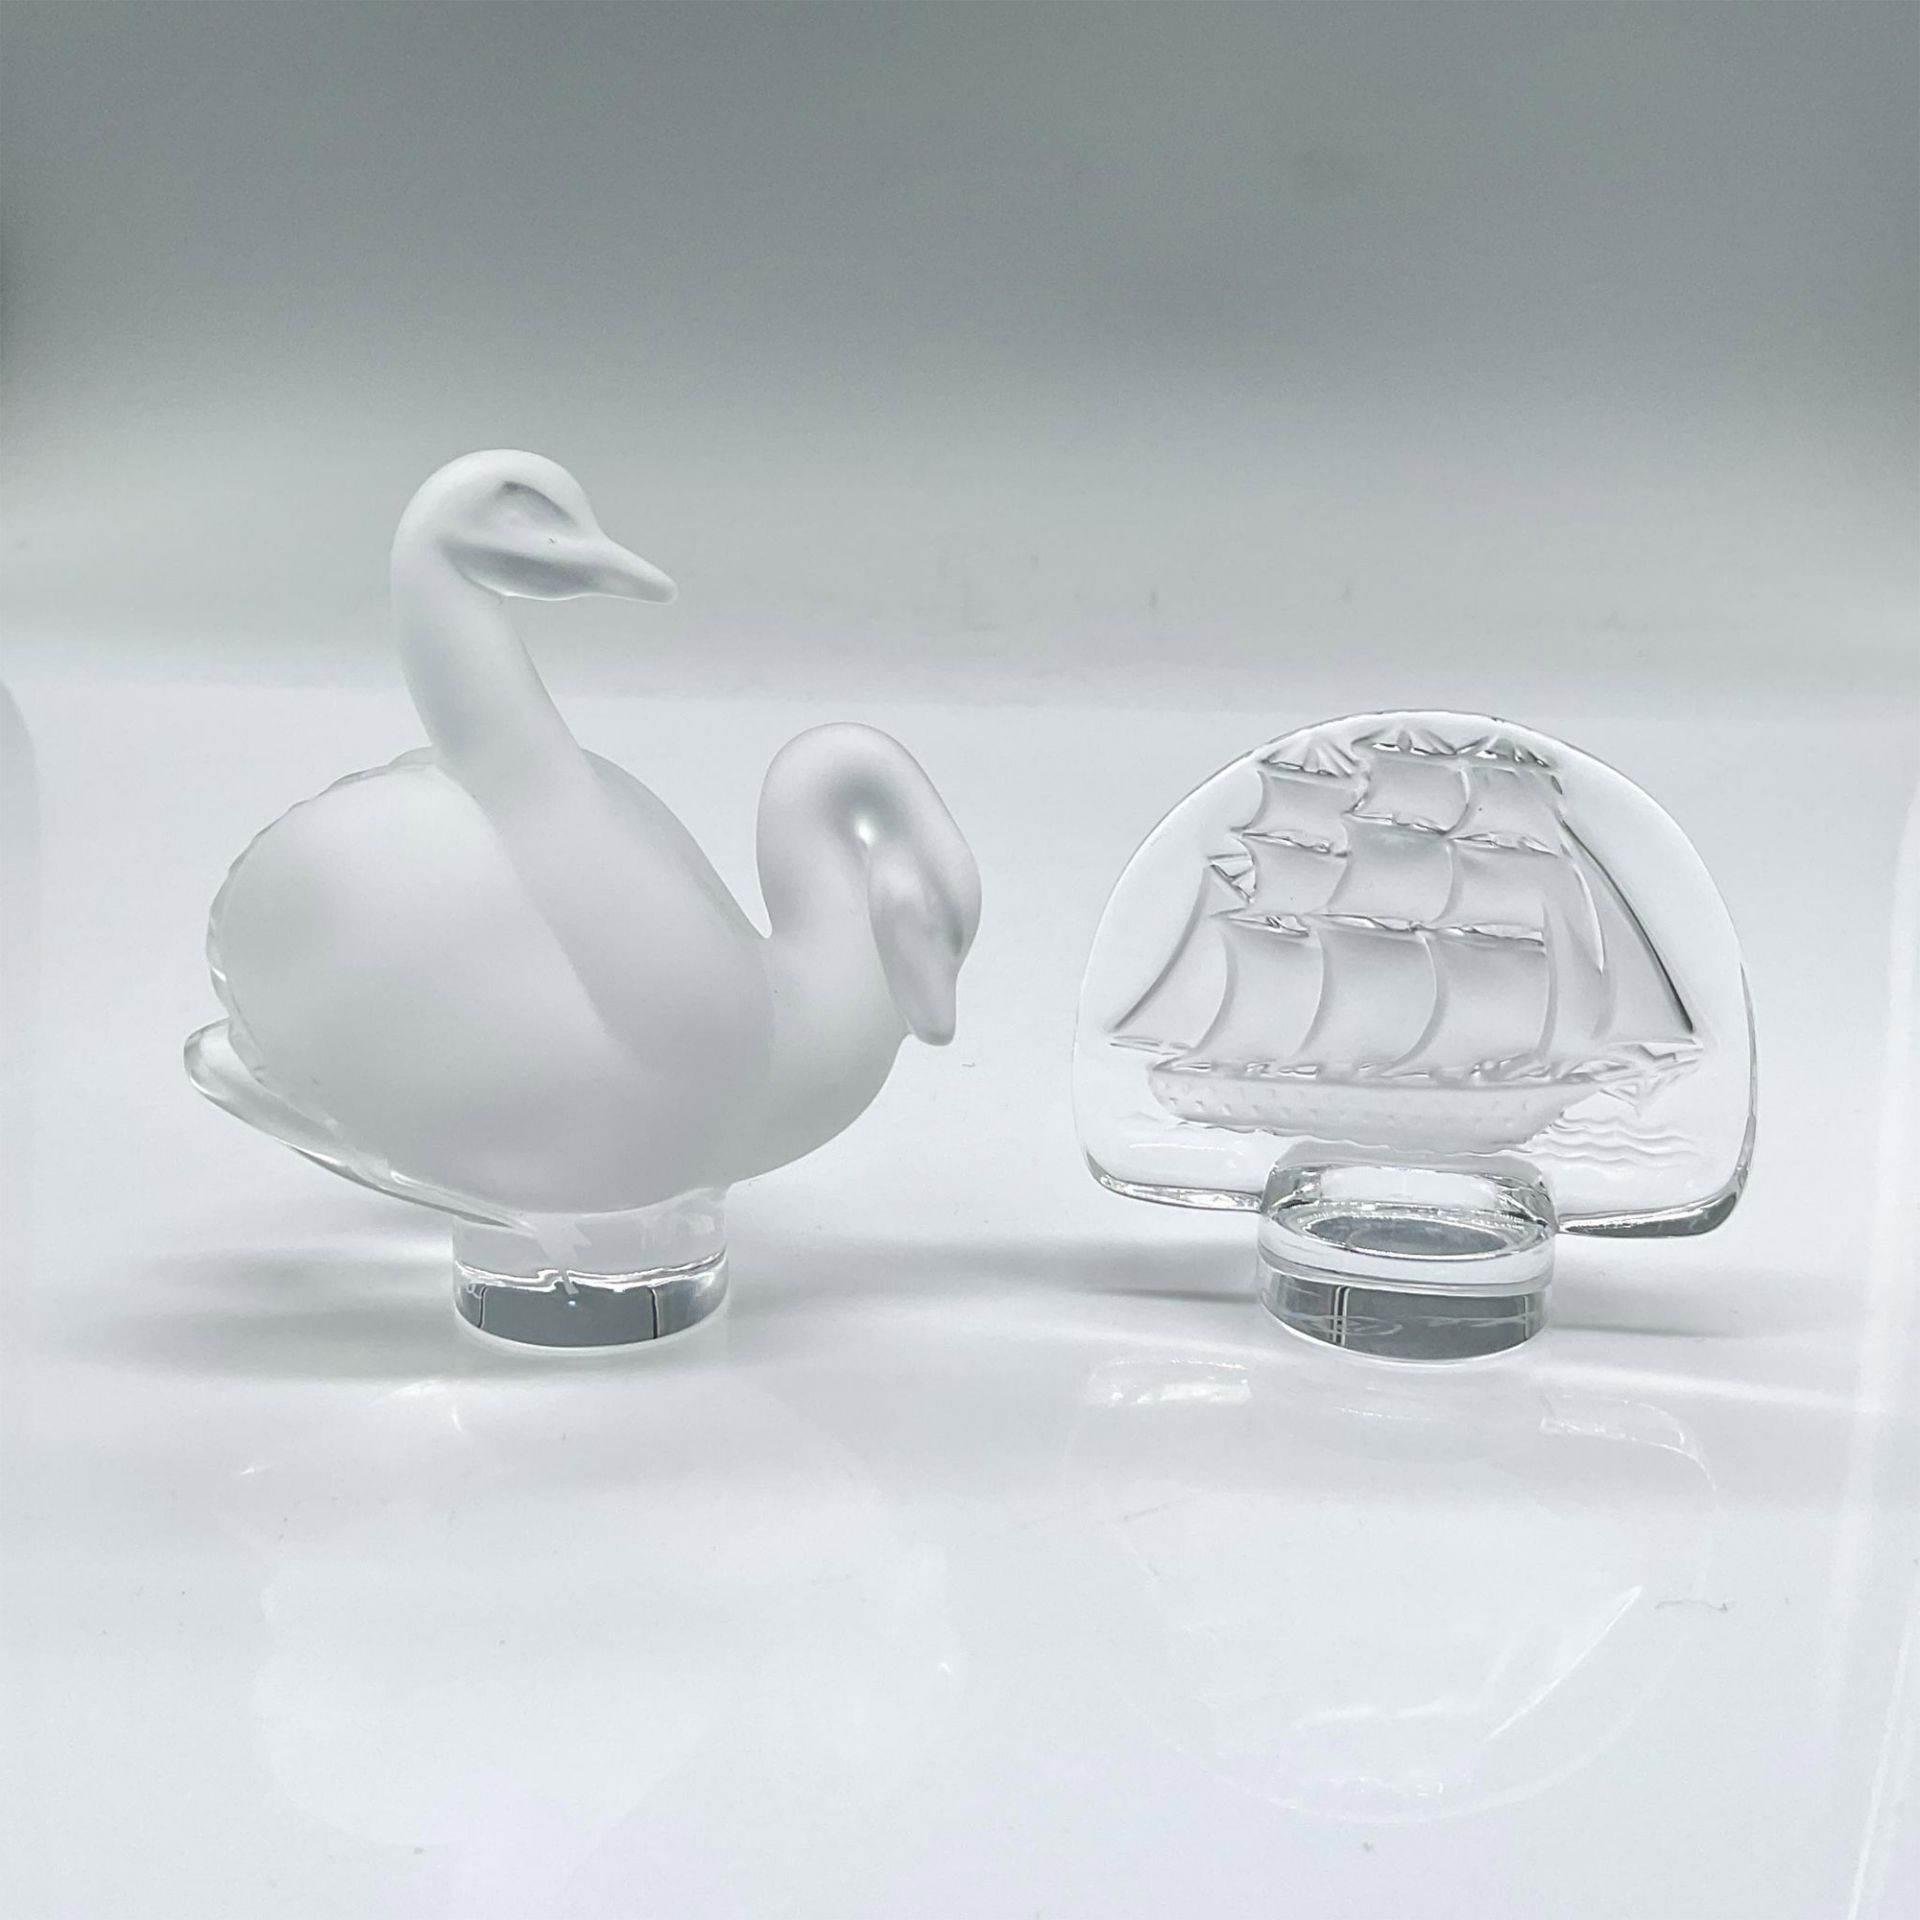 2pc Lalique Crystal Paperweights, Caravelle Ship and Swans